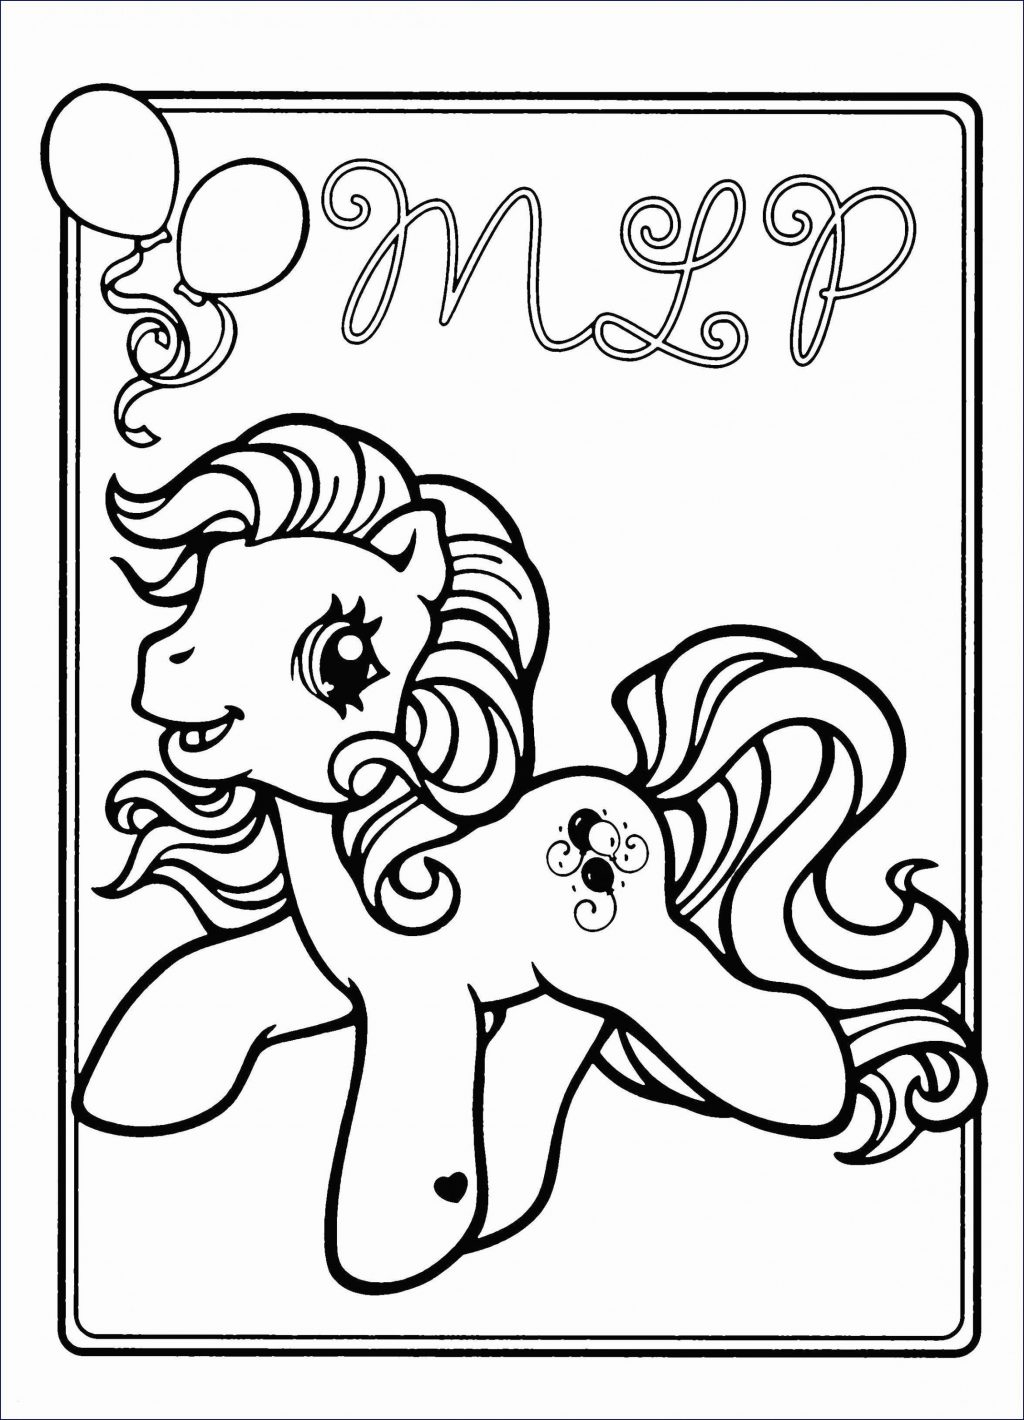 Preschool Valentines Day Coloring Pages Coloring Pages Ponies Coloring Pages My Little Pony Princess